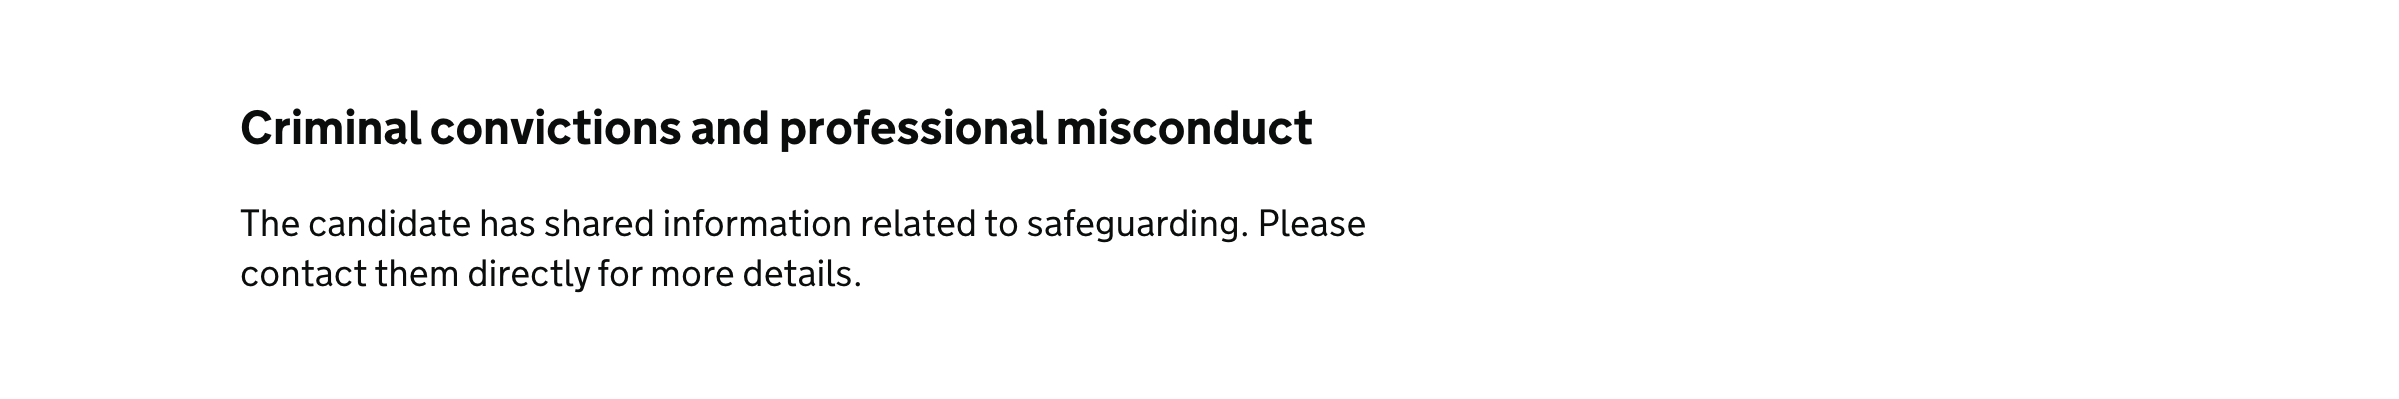 Screenshot of ‘Criminal convictions and professional misconduct’ section of application form.